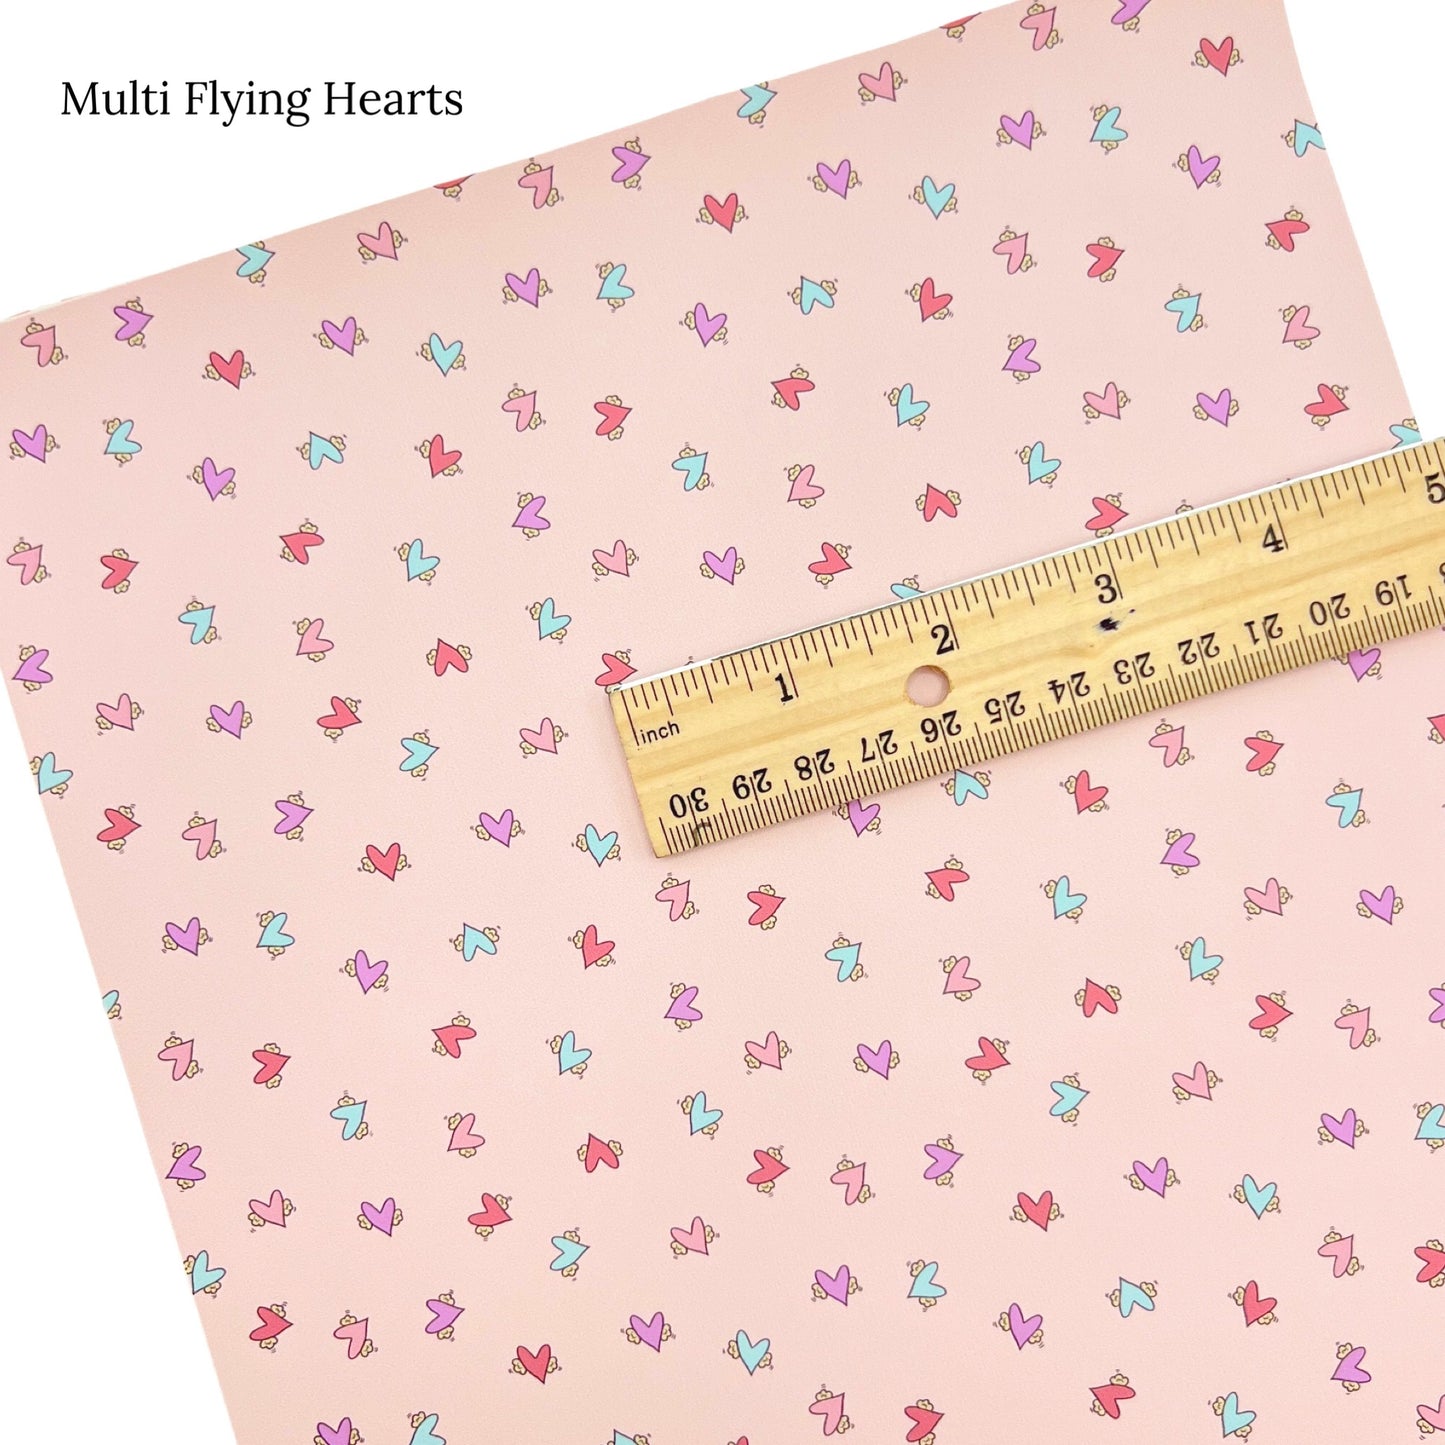 wild daisy mini flying hearts on light pink faux leather sheet